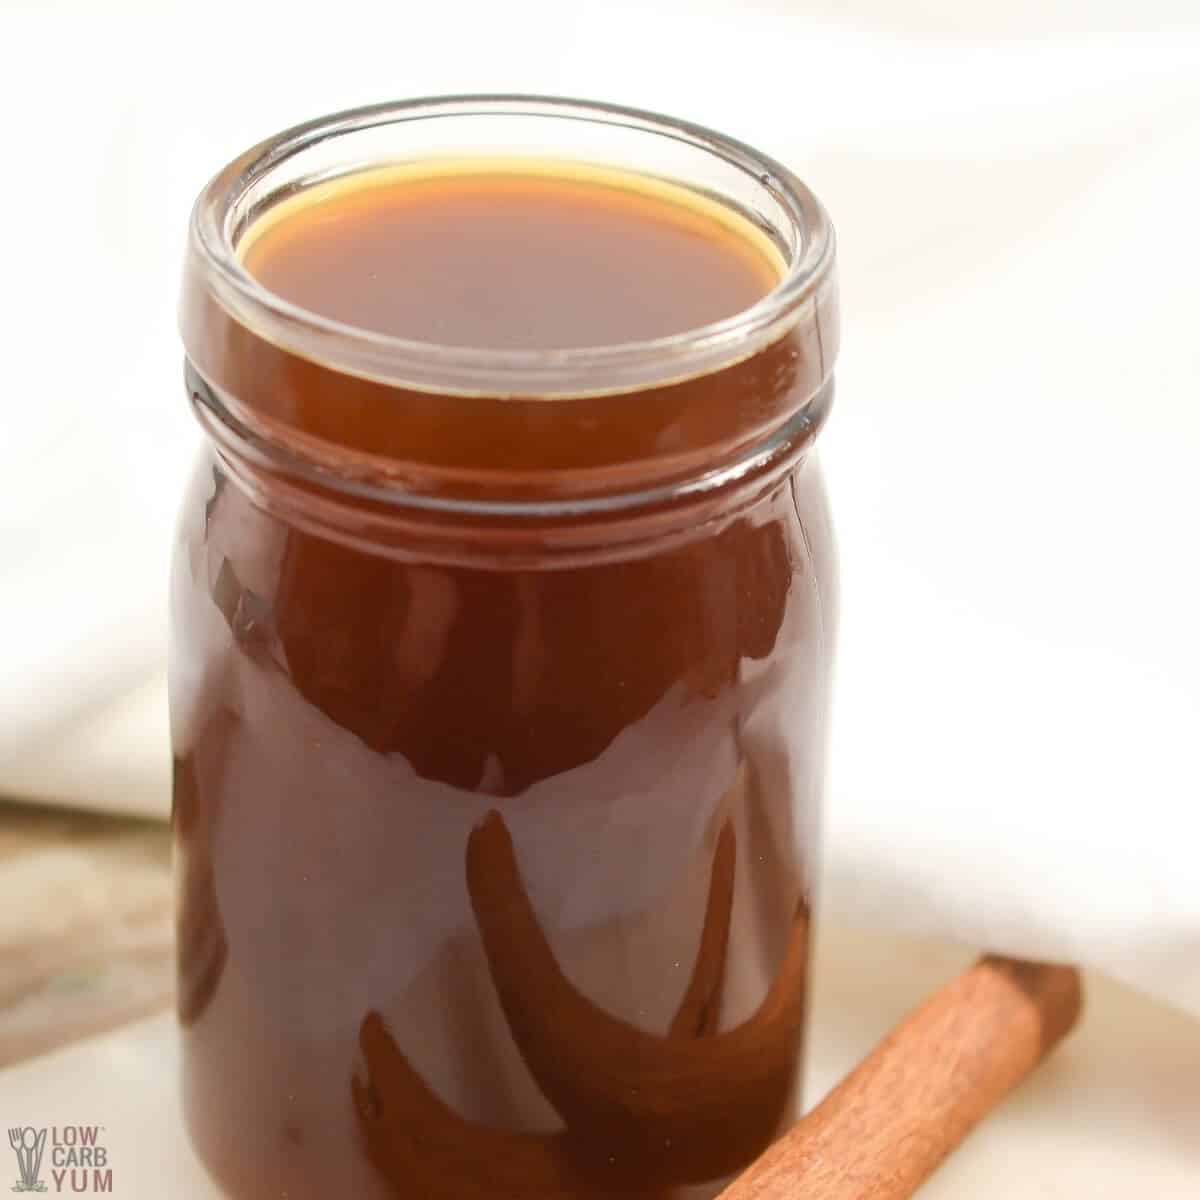 sugar free cinnamon dolce syrup featured image